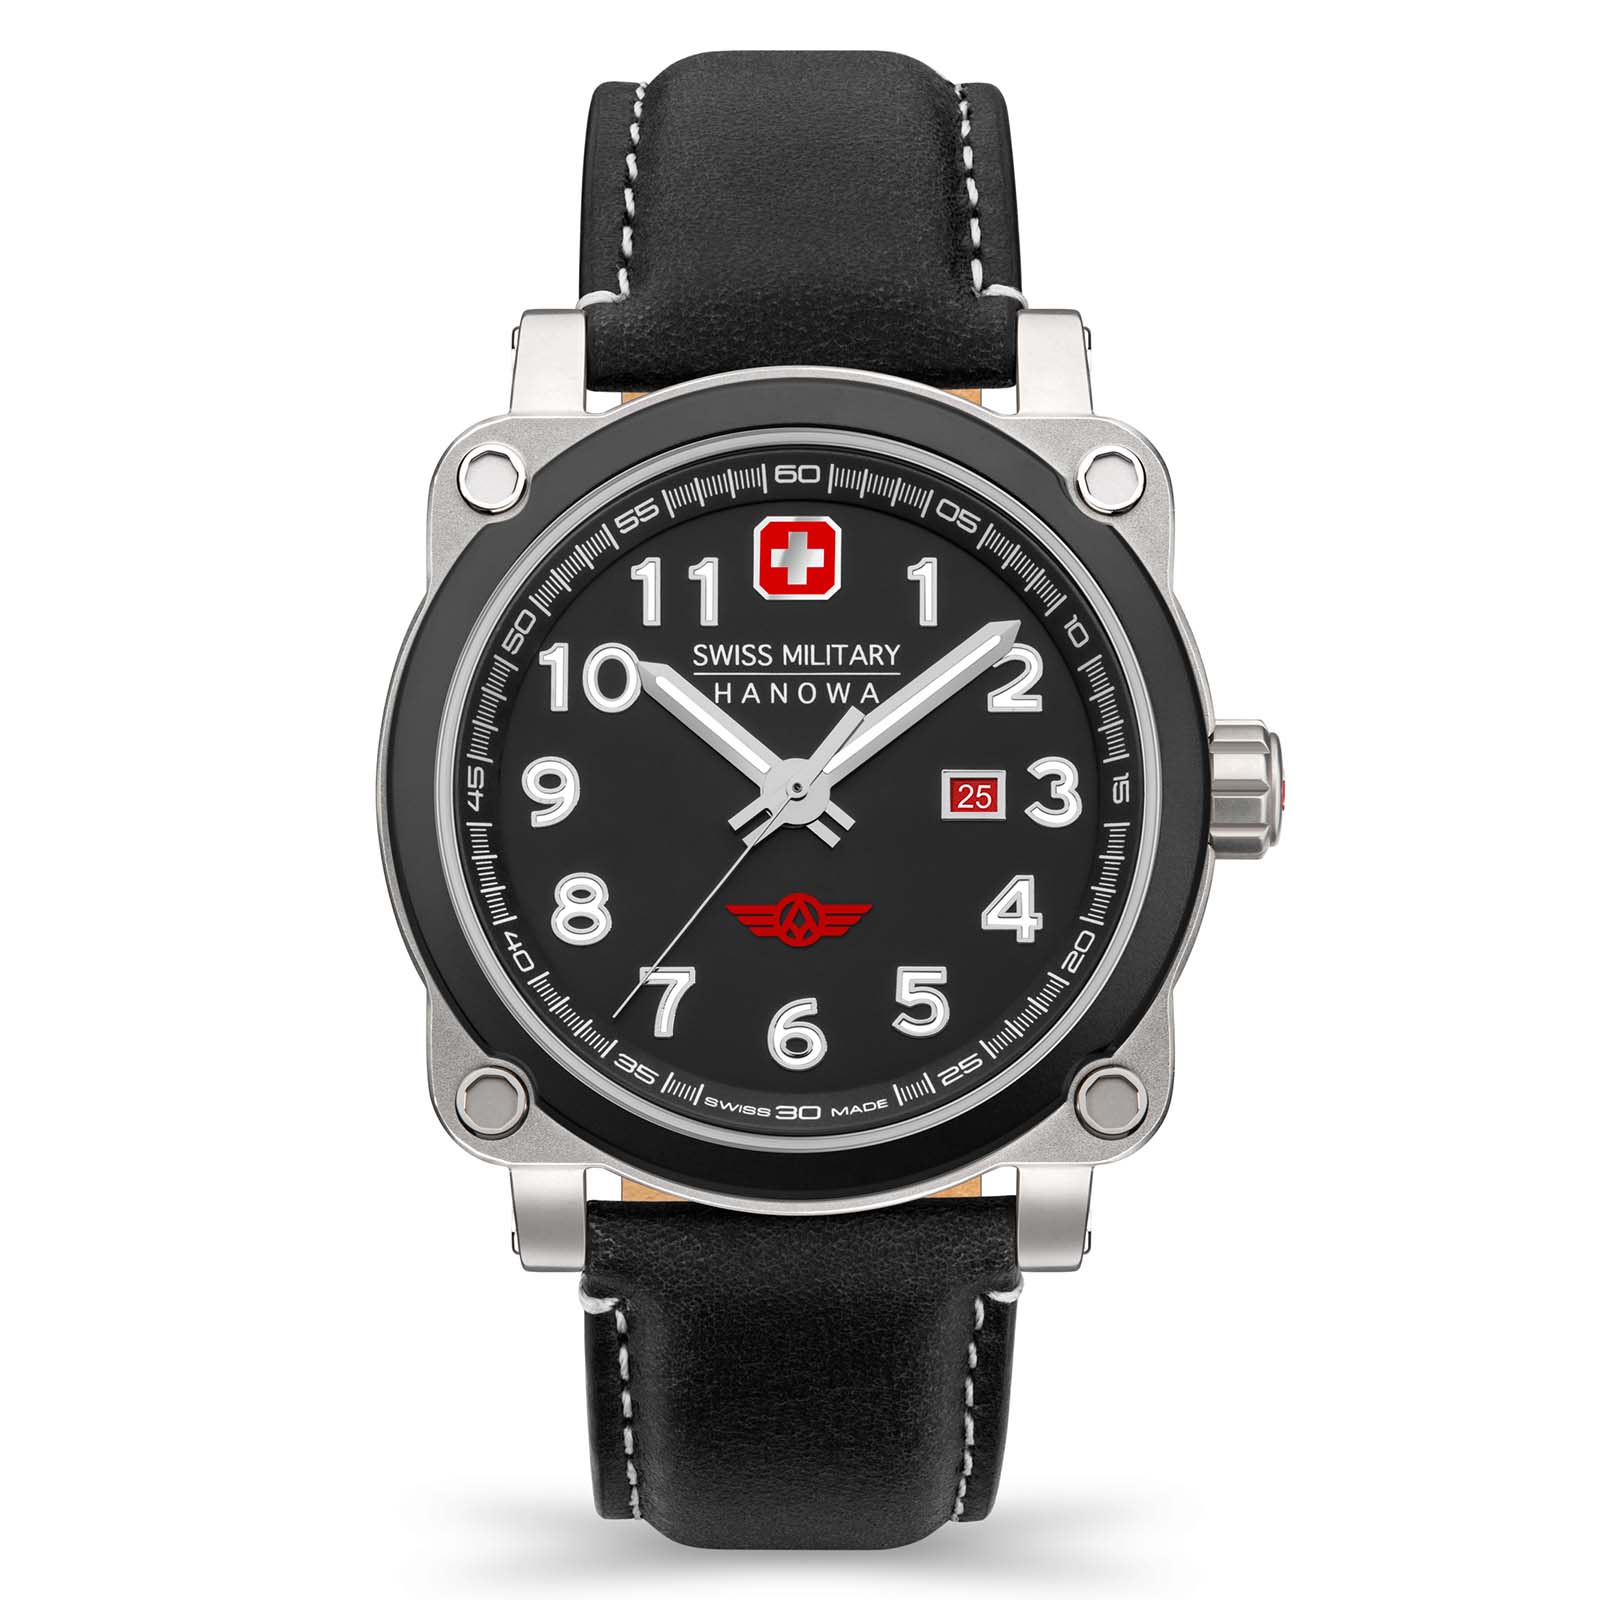 Discover and Switzerland of – Hanowa Military | Watches Online Prices Collections Watches Swiss